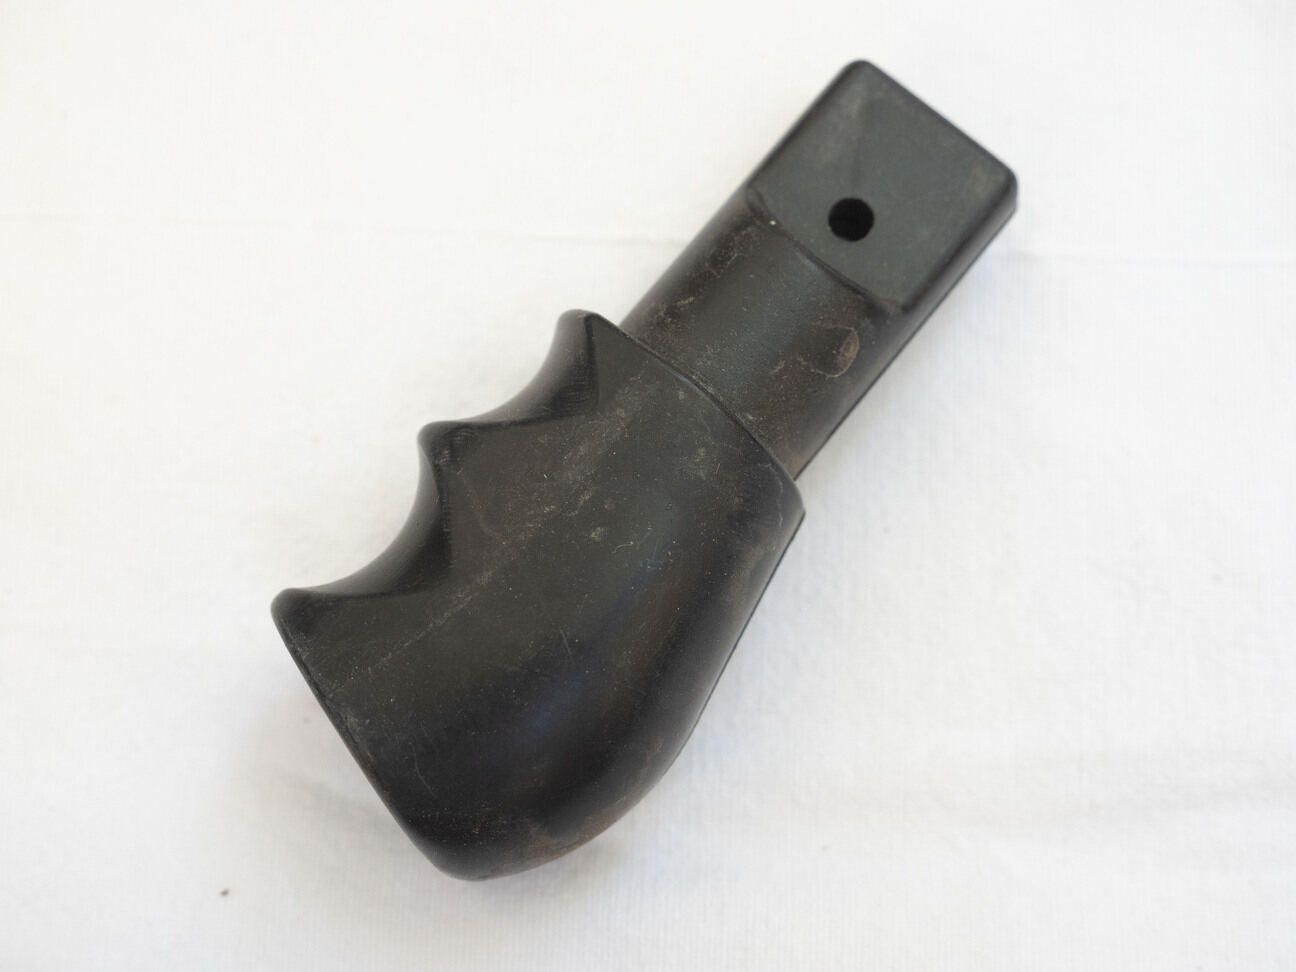 Tippmann 98 foregrip, used.